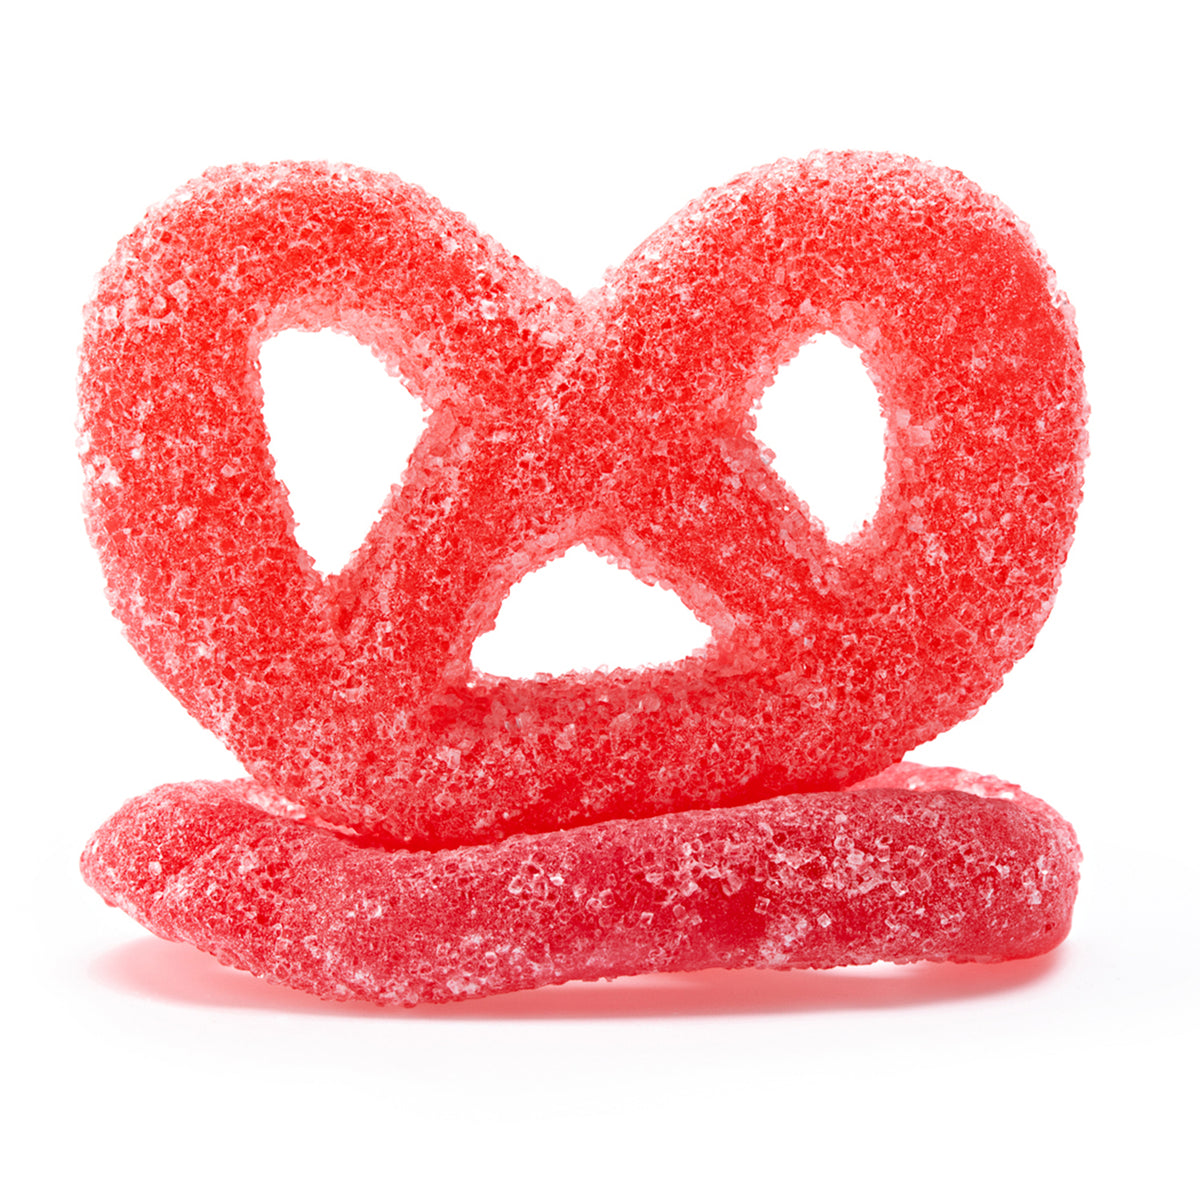 Satisfy your sweet tooth with the mouth-watering taste of this licorice.